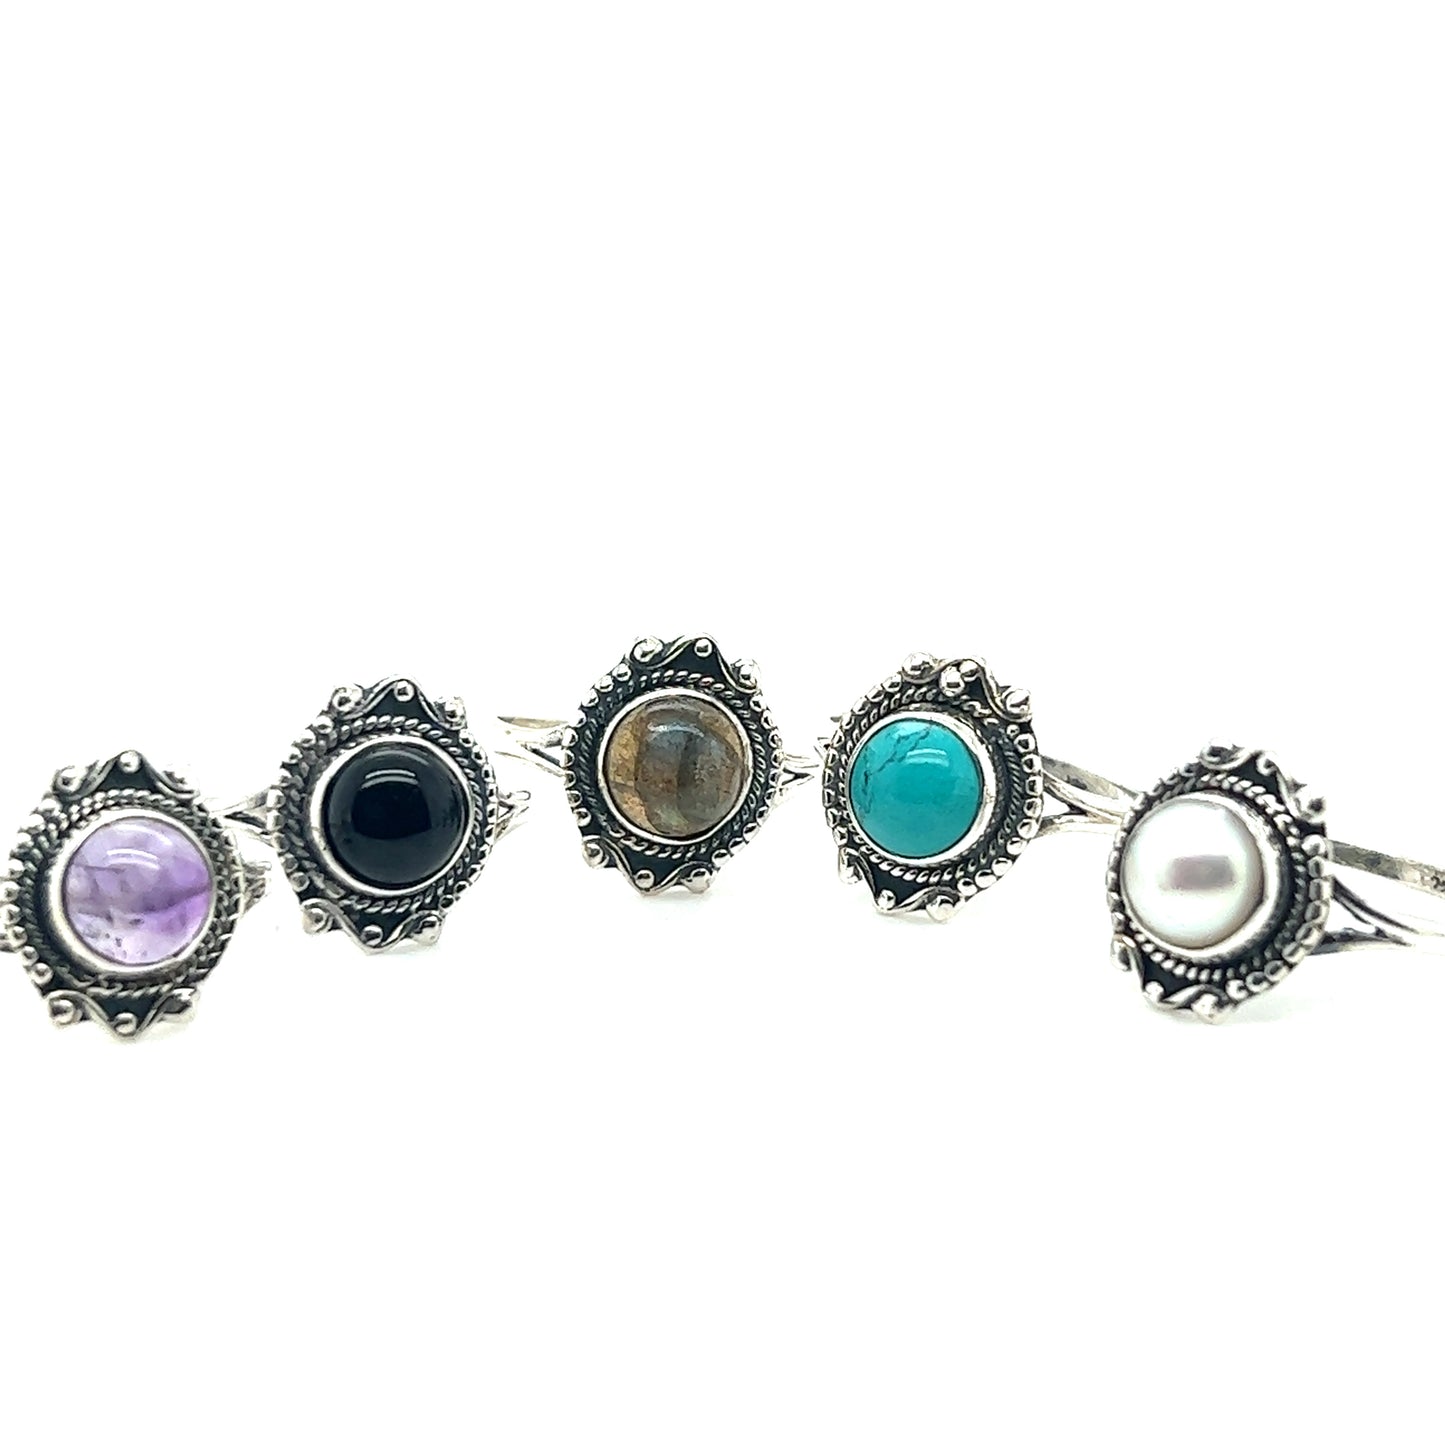 A group of Round Gemstone Rings With Vintage Setting, perfect for a hippie vibe.